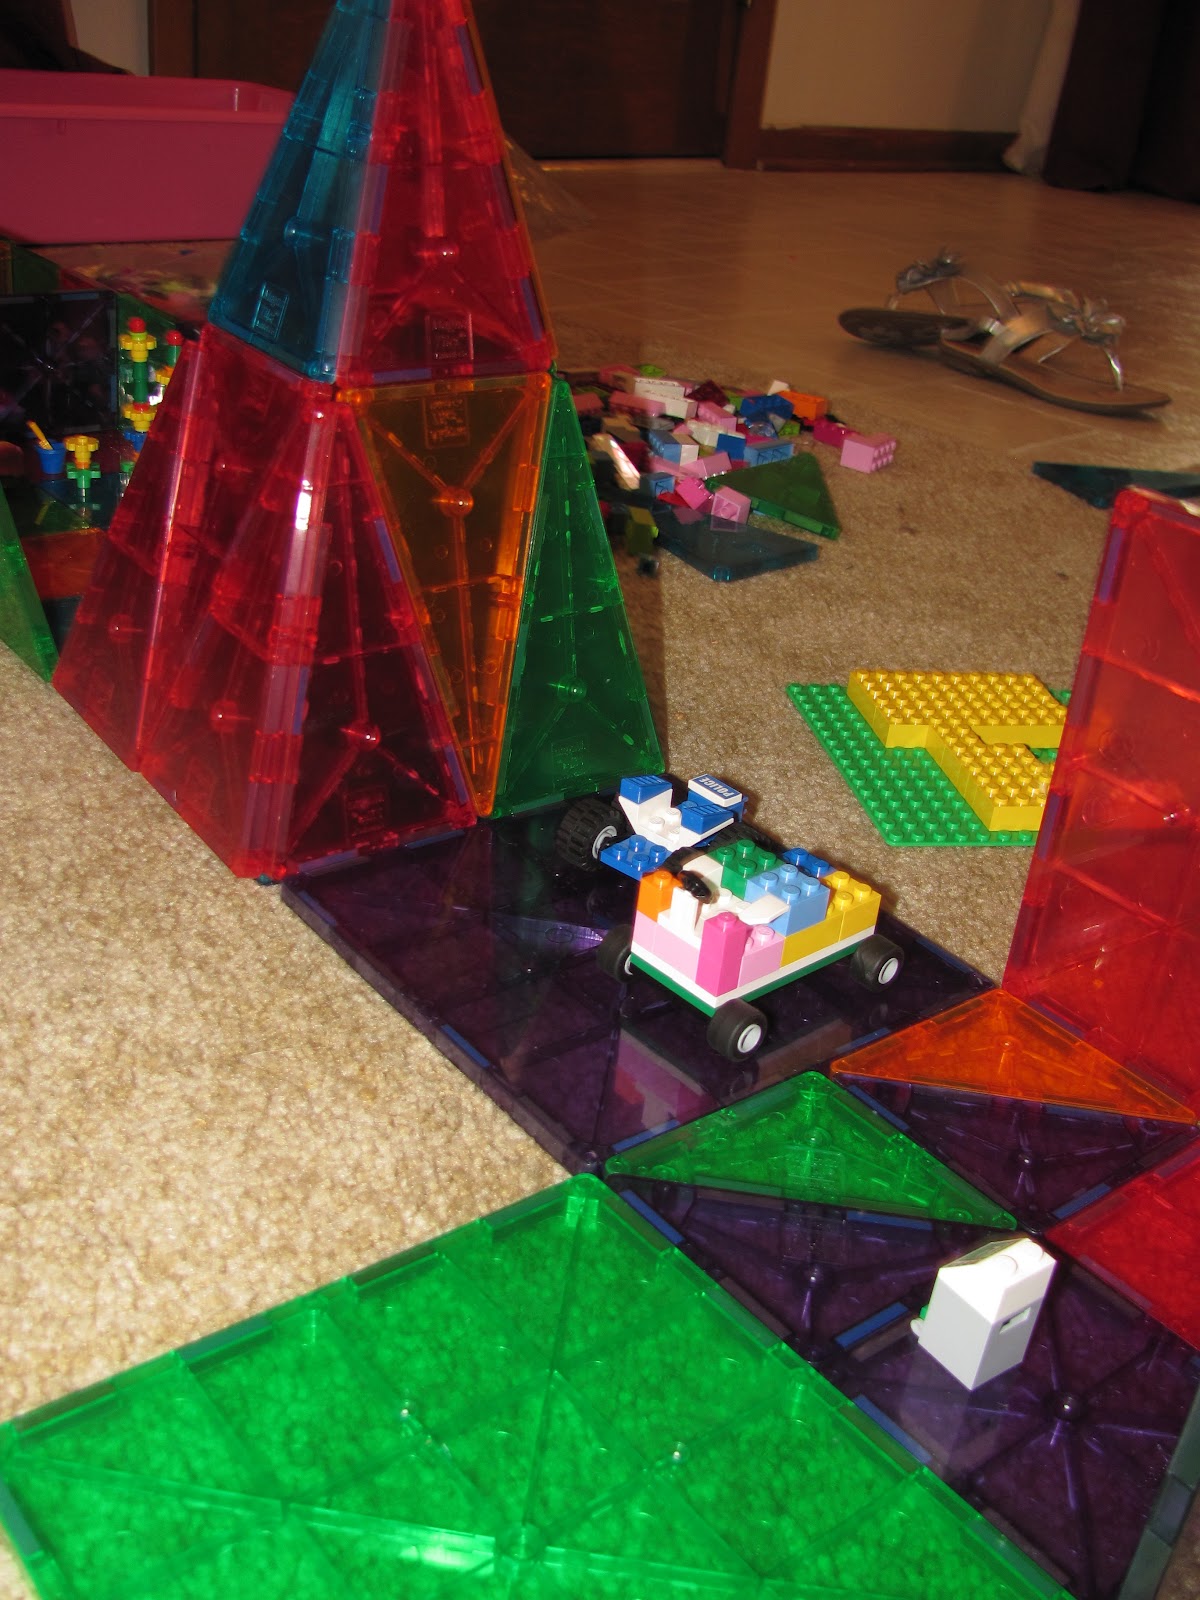 The Chocolate Muffin Tree: Legos and Magna Tiles: Small World Play